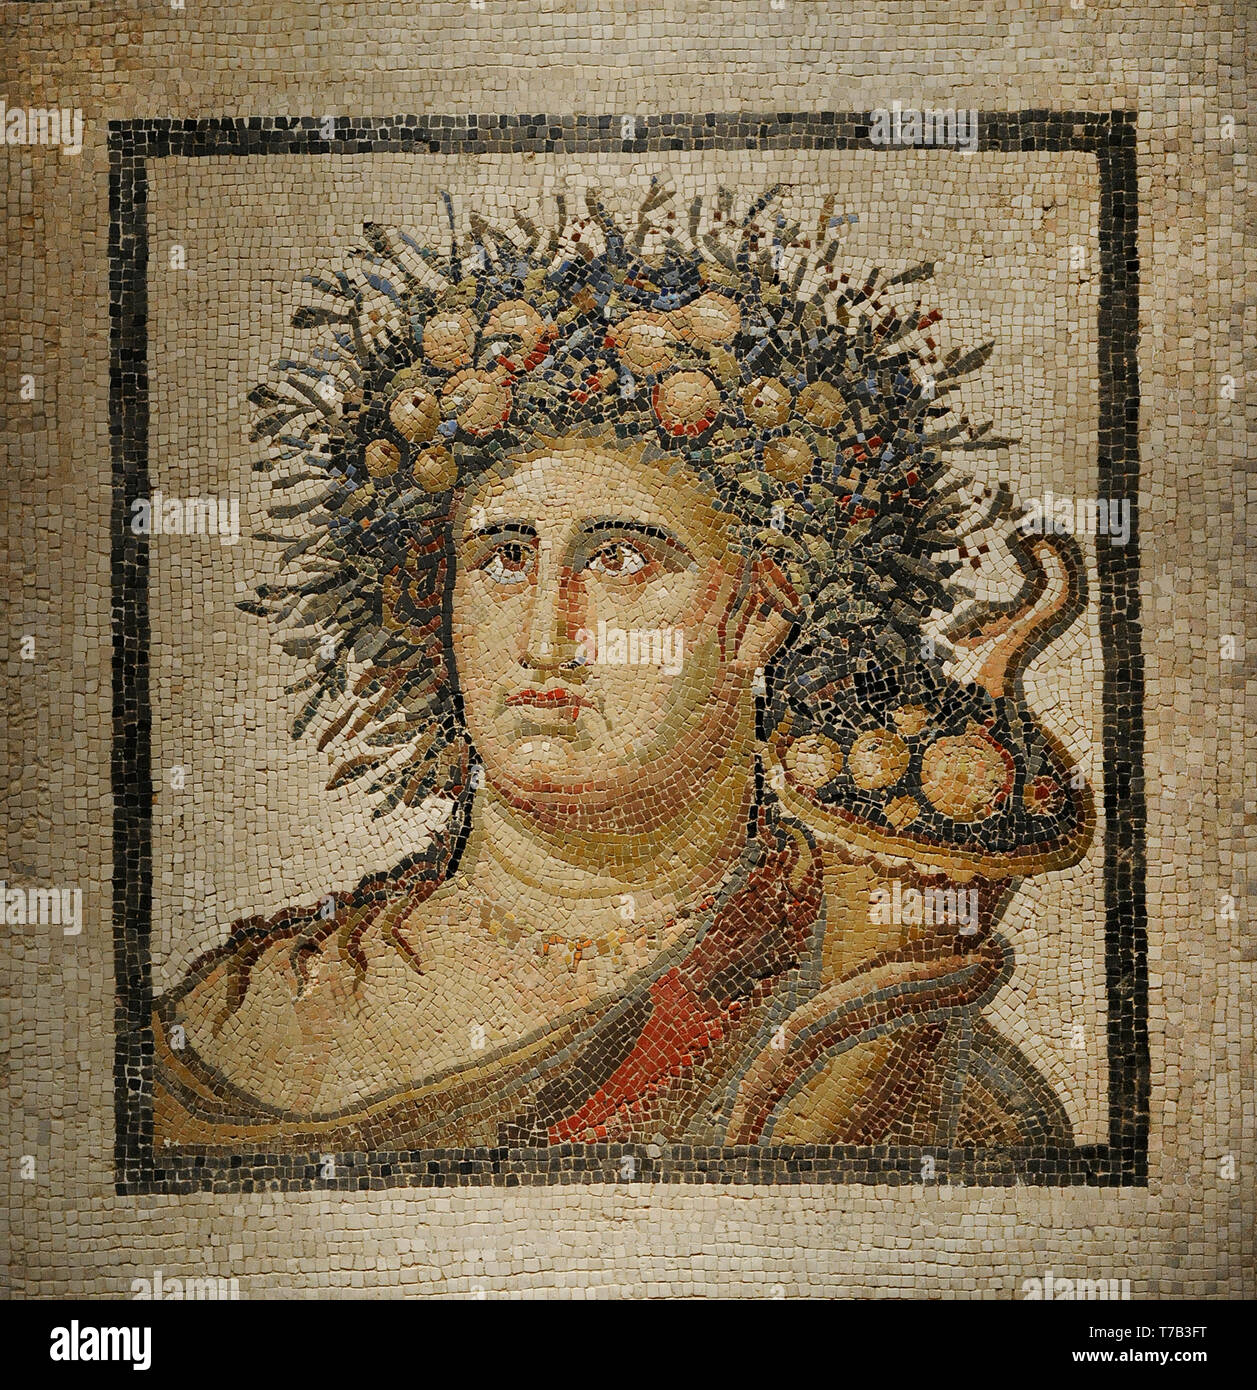 Mosaic with Genius of the Year. Late 2nd century AD.  Roman period. Limestone and marble. From Aranjuez (Community of Madrid, Spain). National Archaeological Museum. Madrid. Spain. Stock Photo